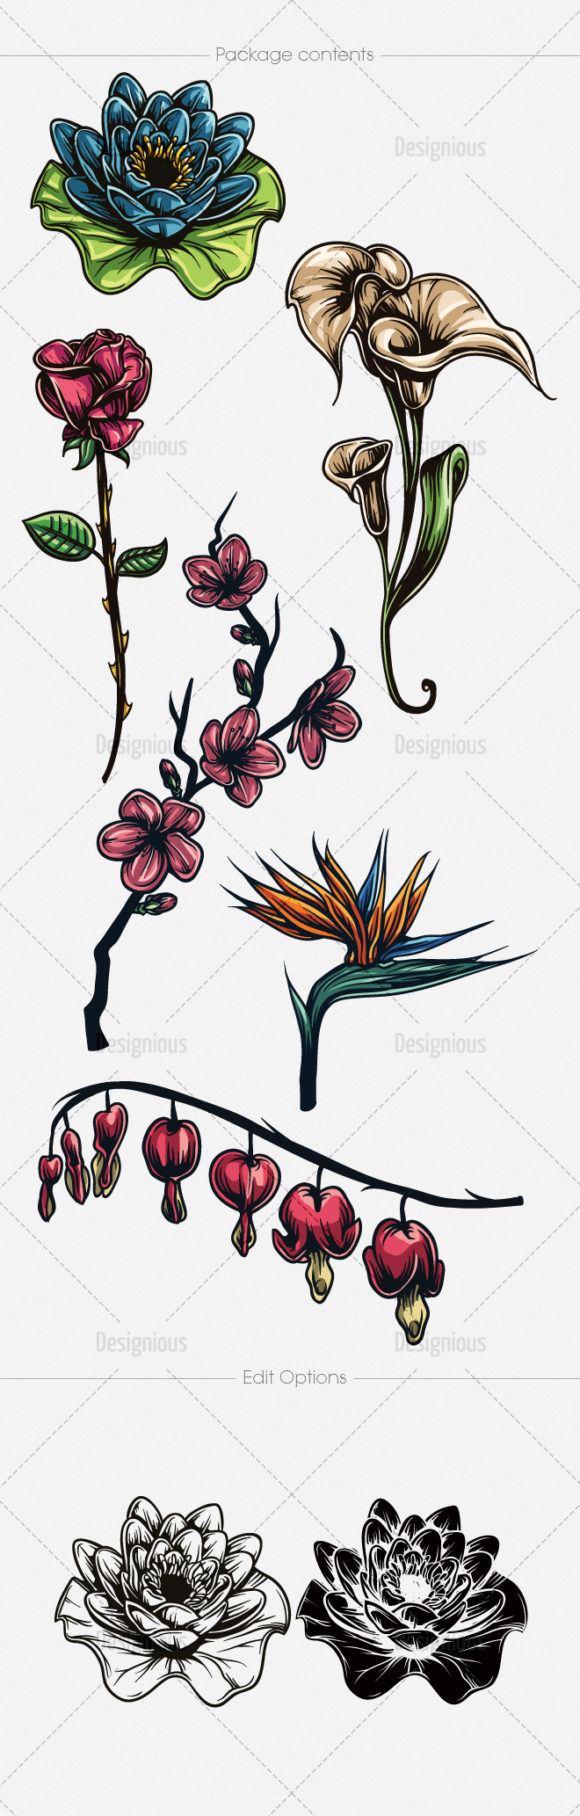 Floral Vector Pack 137 2